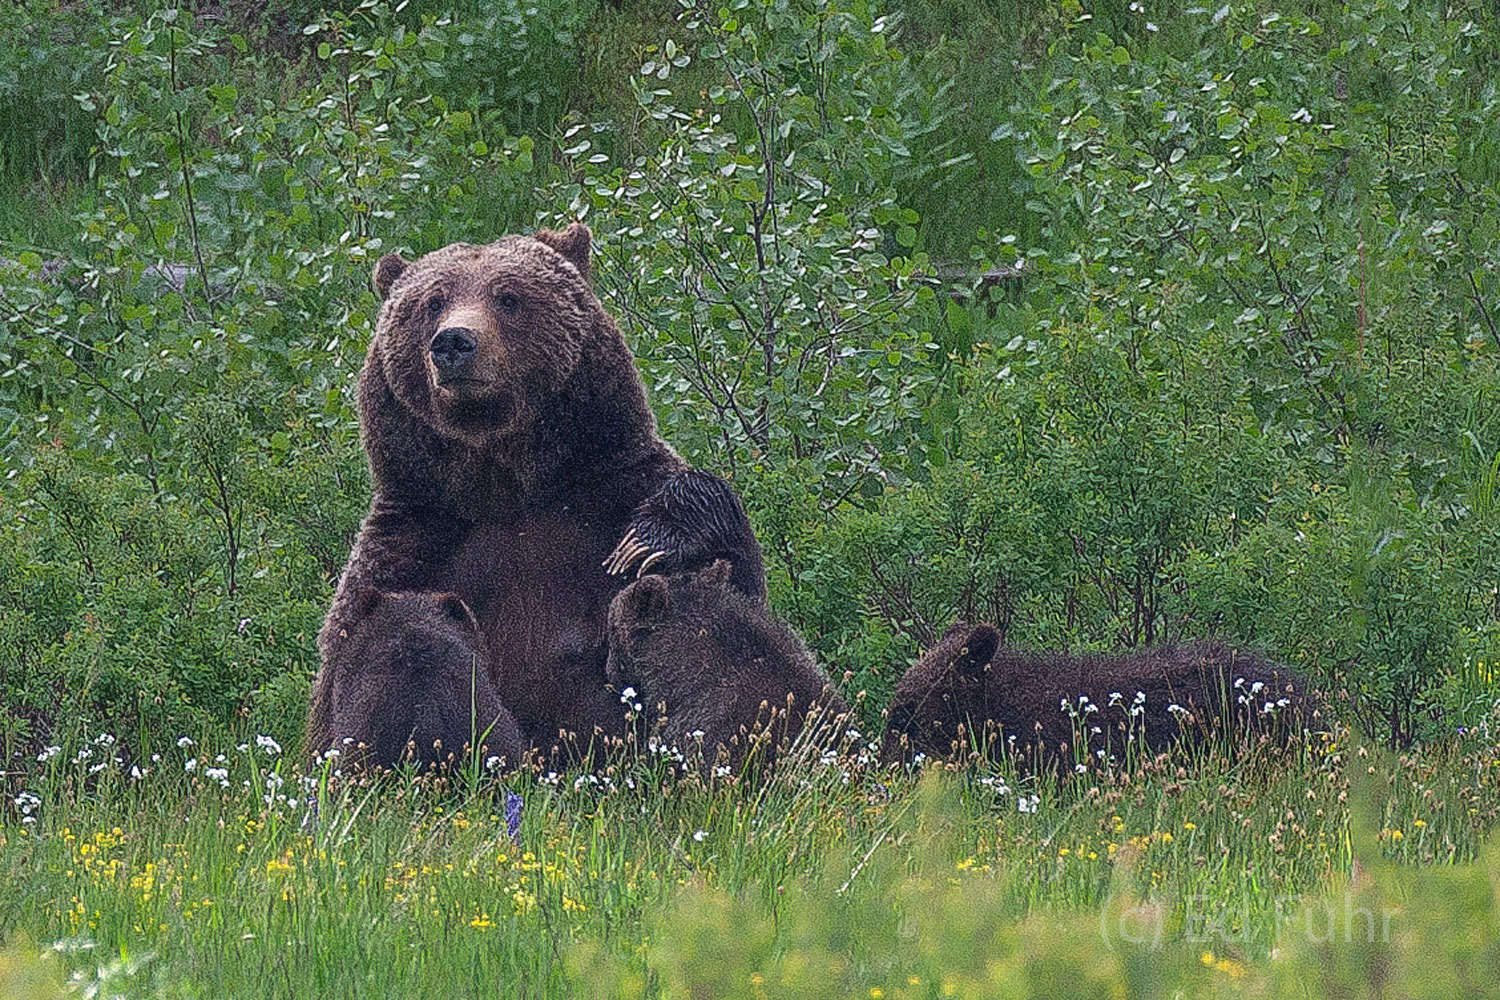 Grizzly 399 retreats to the woodland edge to nurse her triplet cubs.